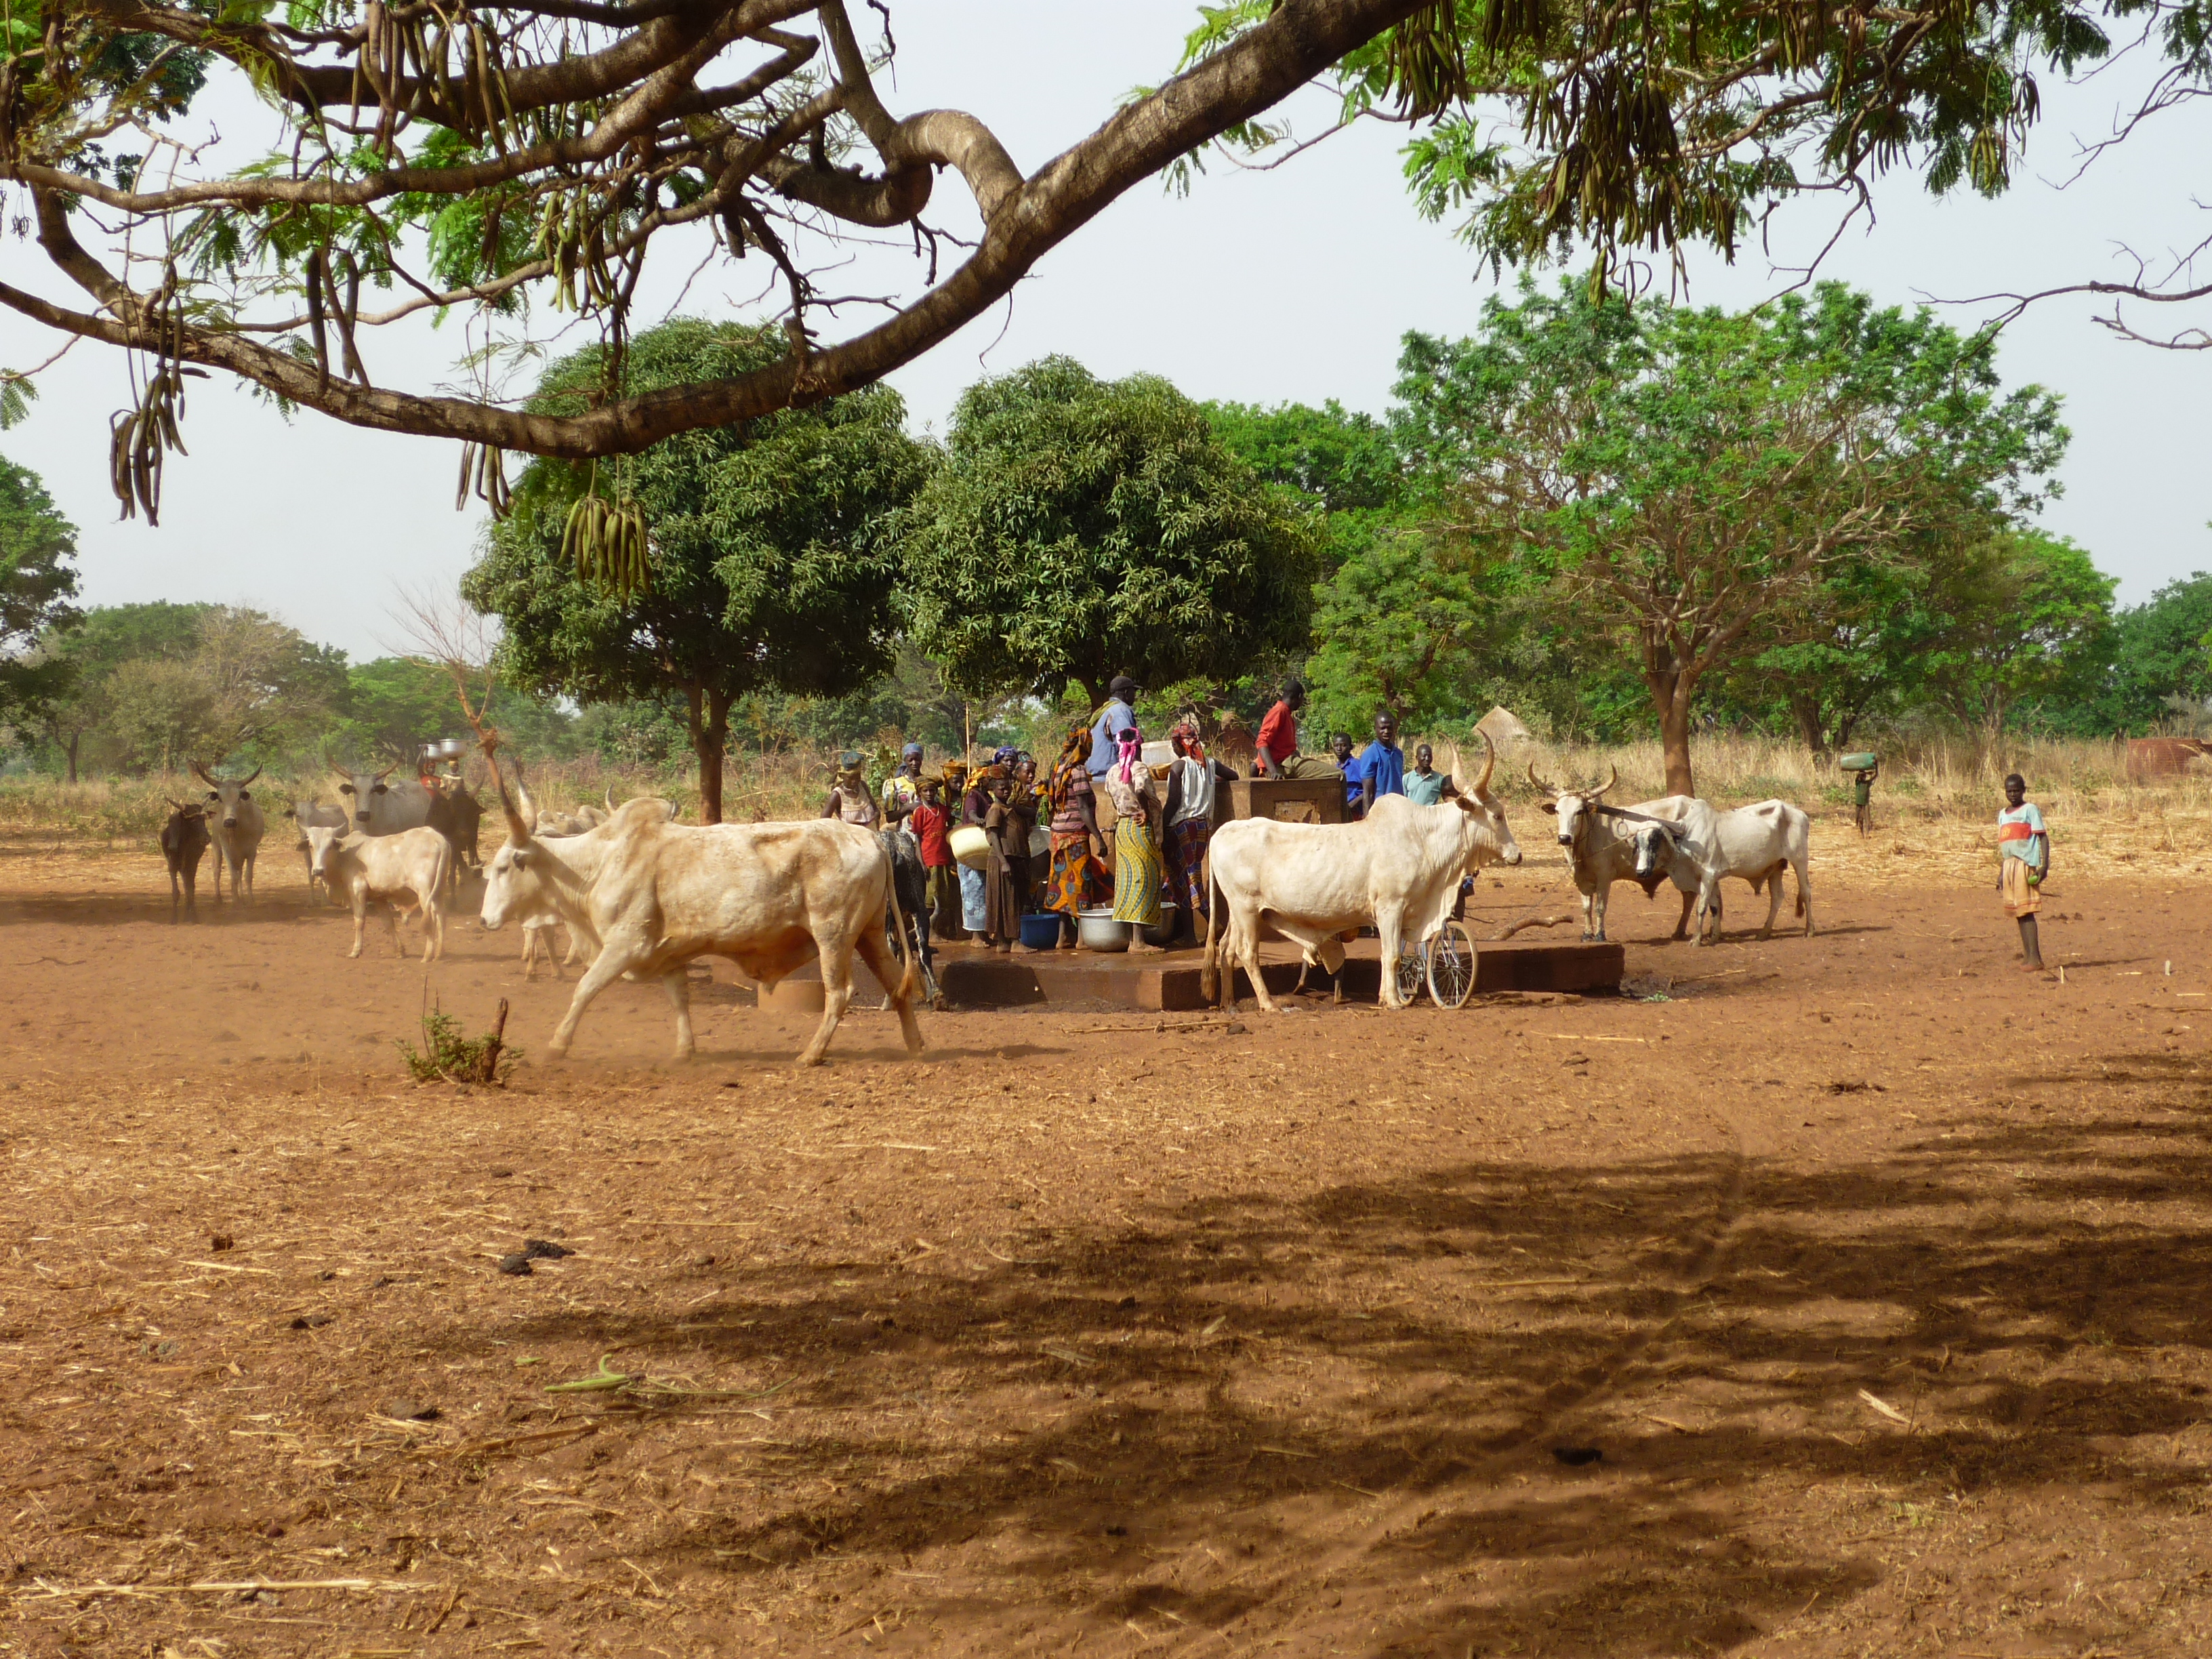 Villagers around a public well in Chad